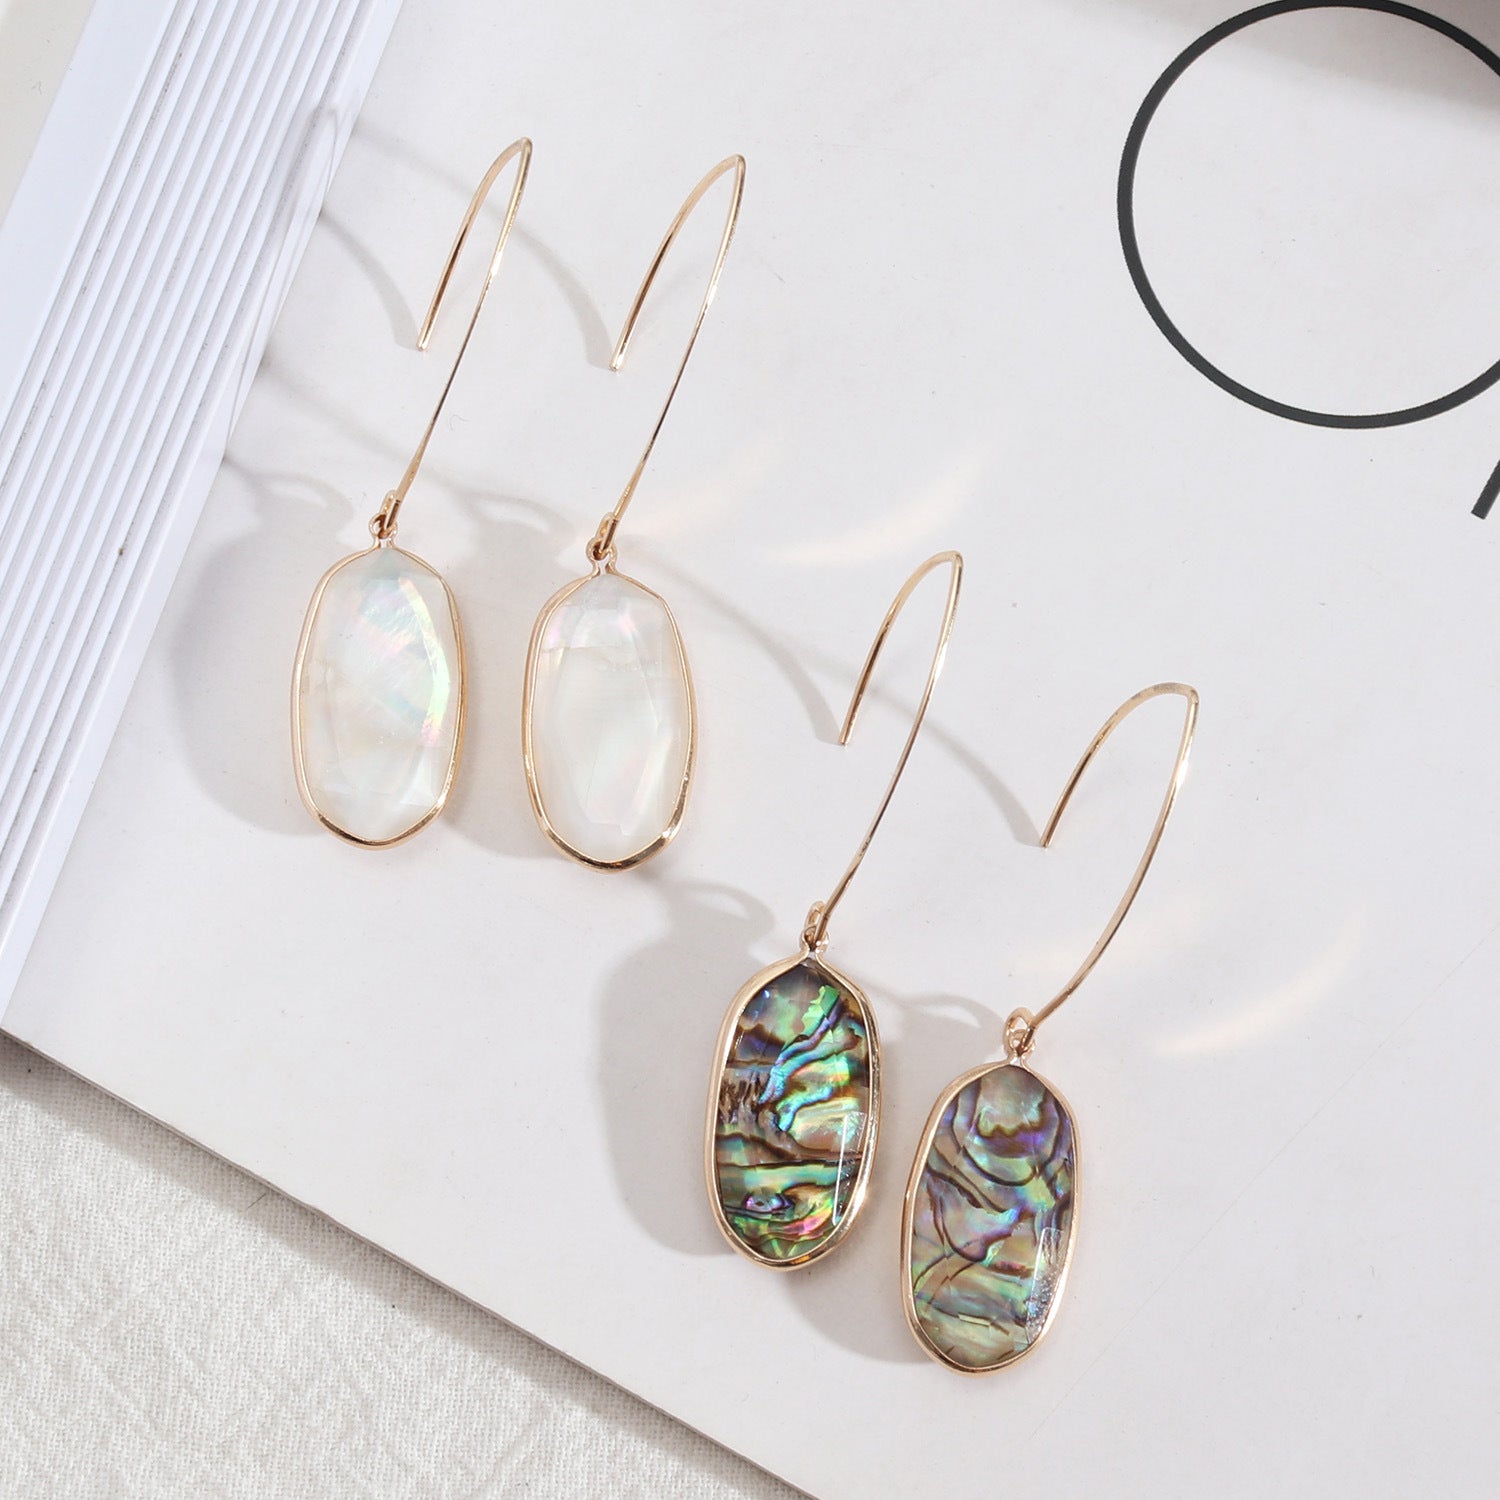 Oval Gold Plated Abalone Earrings, White Shell Earrings, Faceted Natural Seashell Jewelry AL515